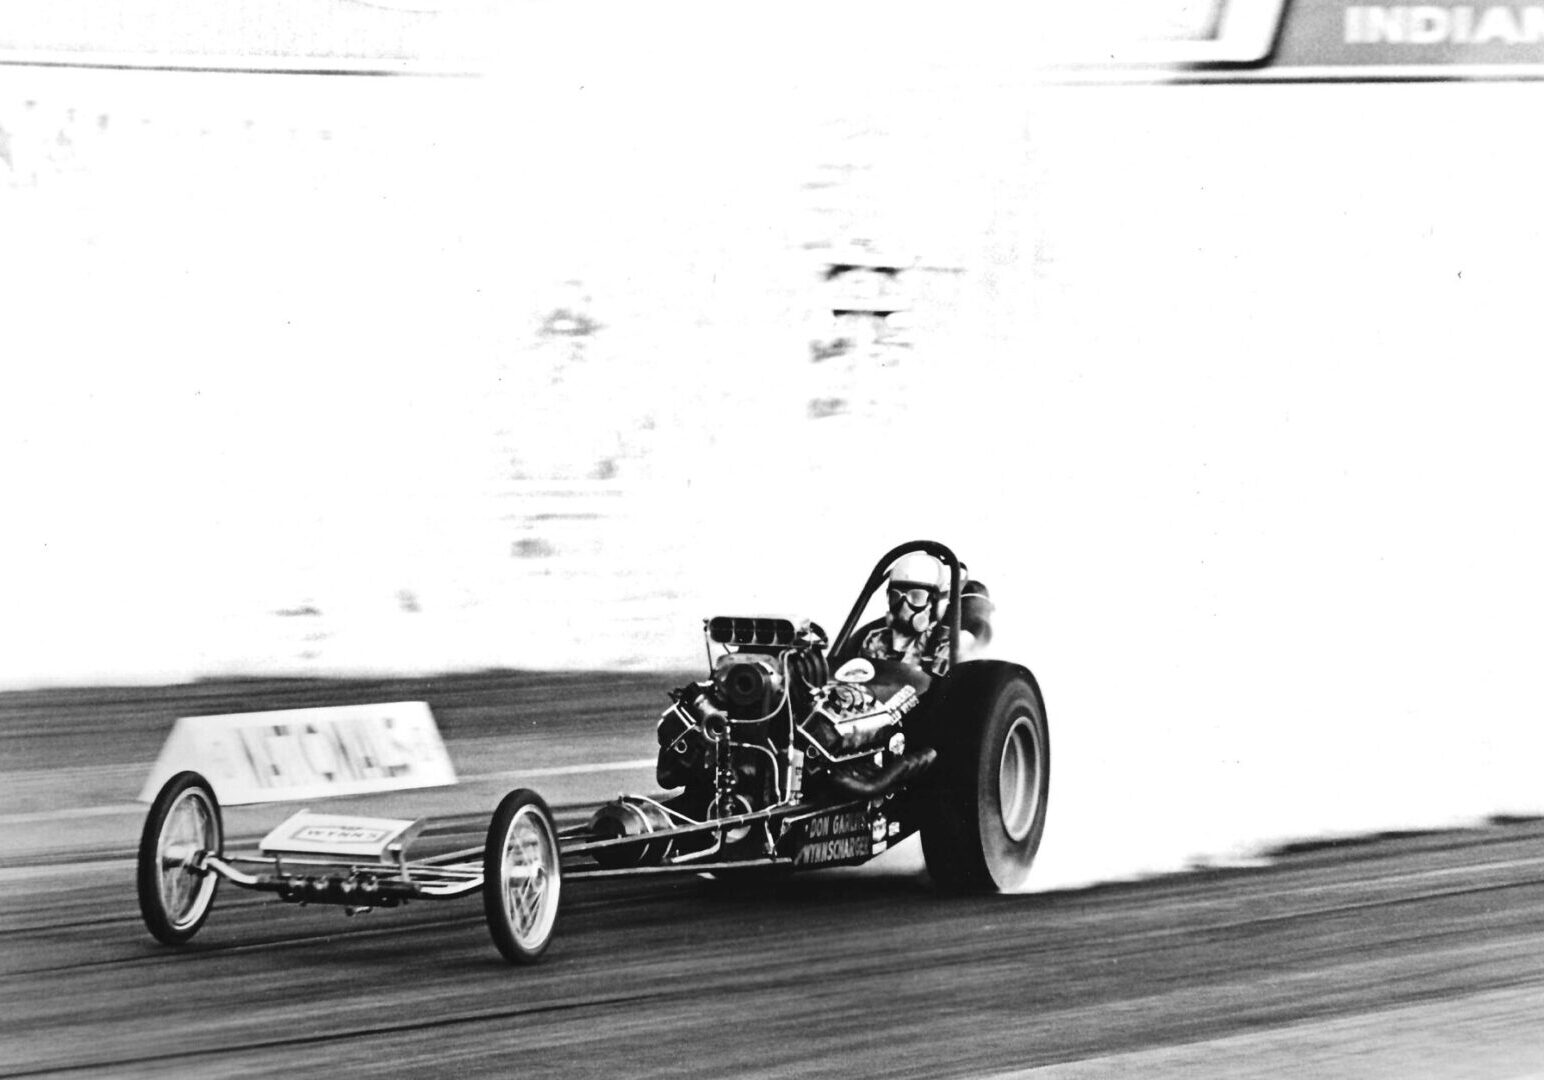 A black and white photo capturing the intensity of drag racing.